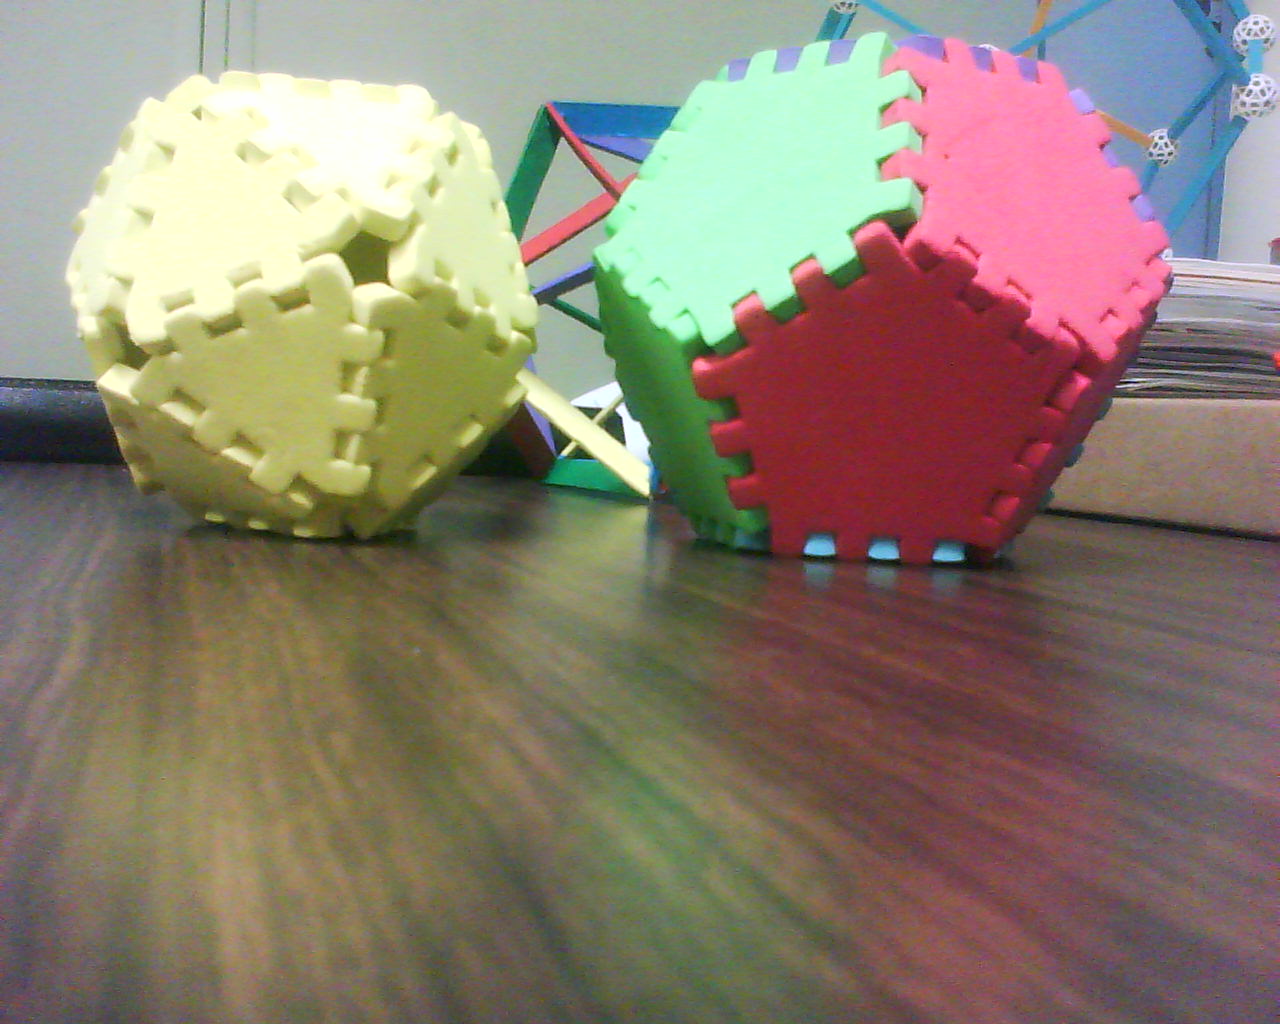 icosahedron and dodecahedron 01